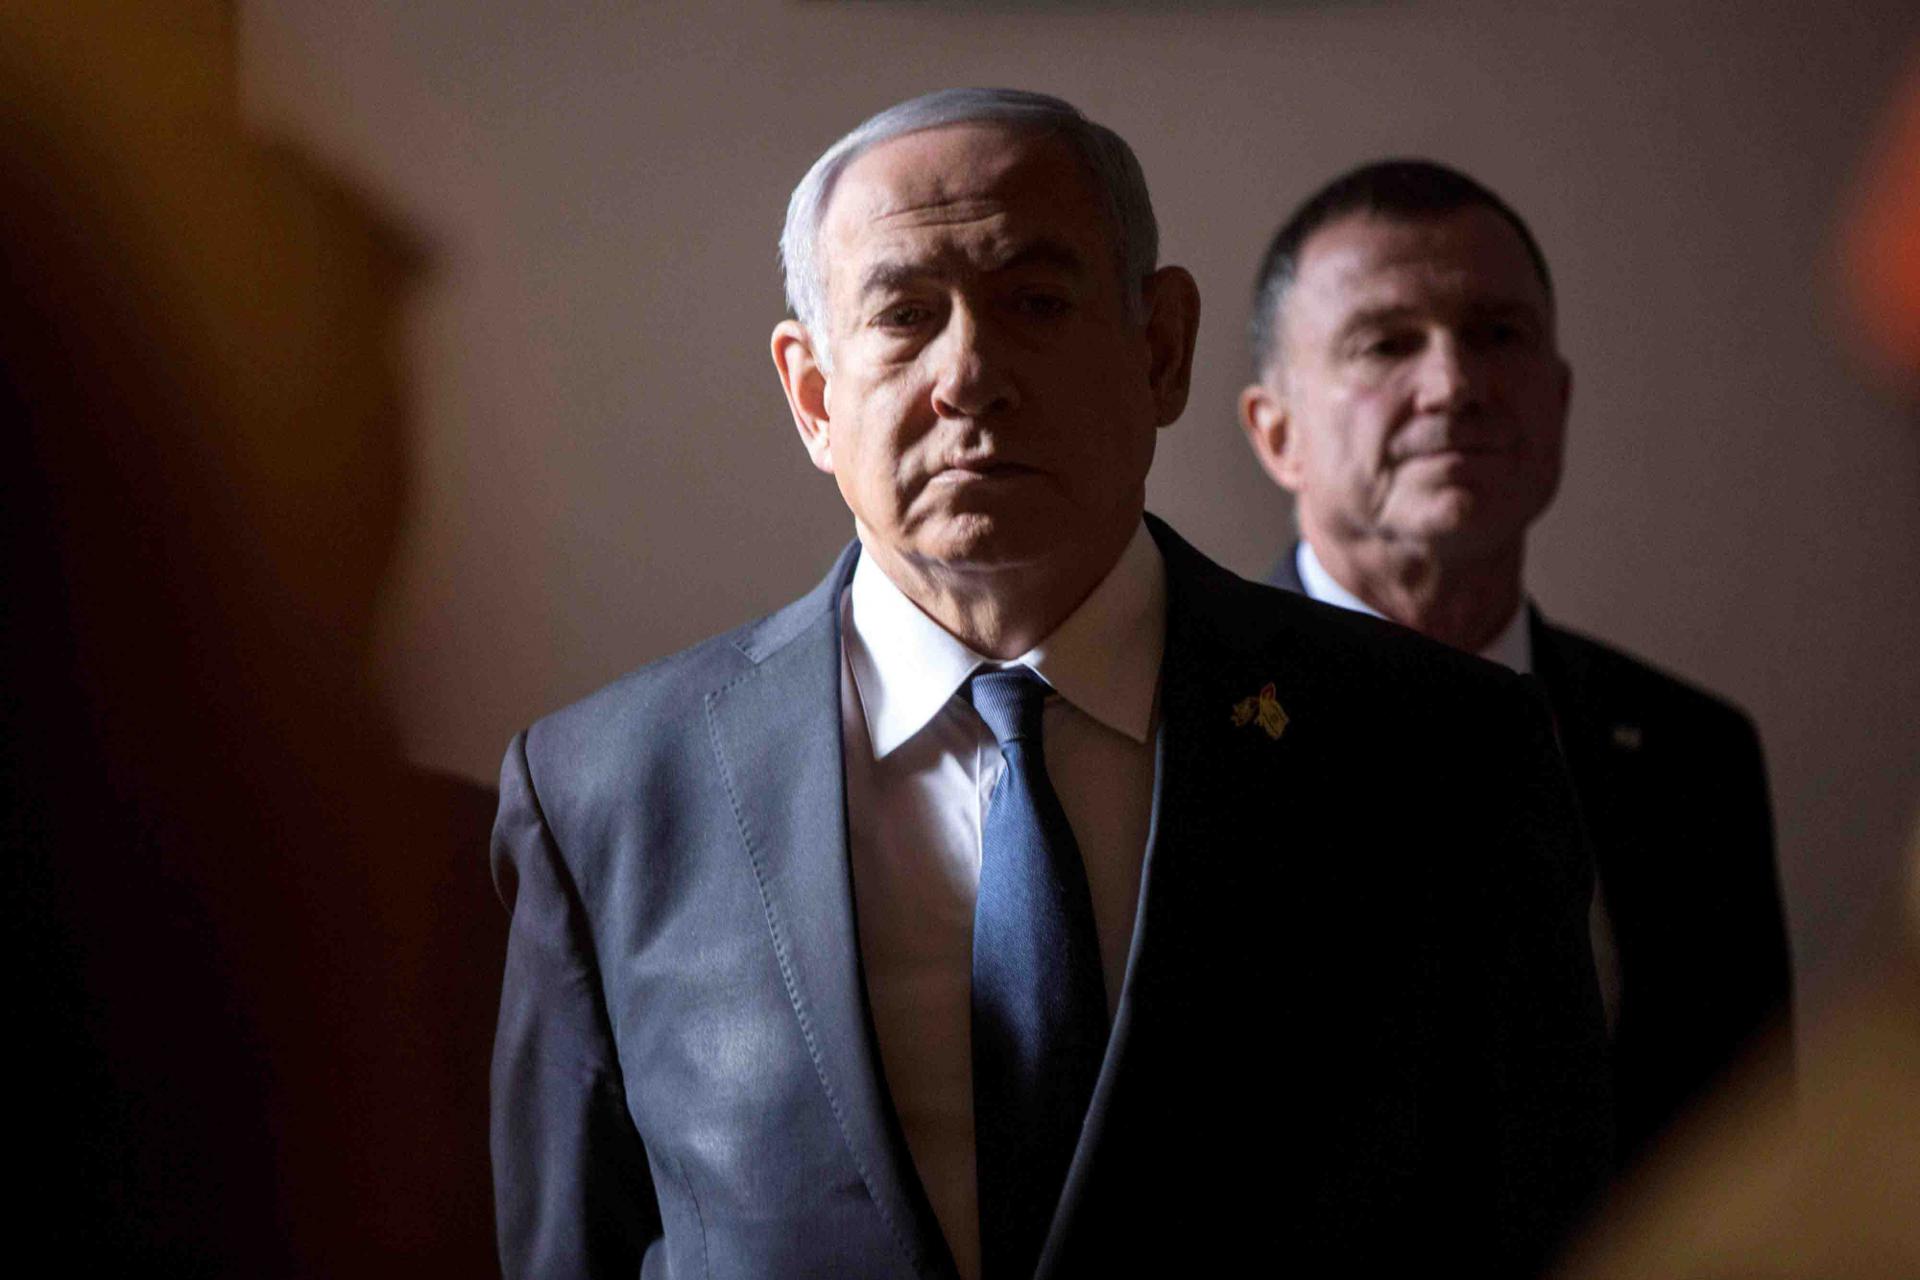 "As in past instances of forming a government, I intend on asking an extension from the president," Netanyahu said